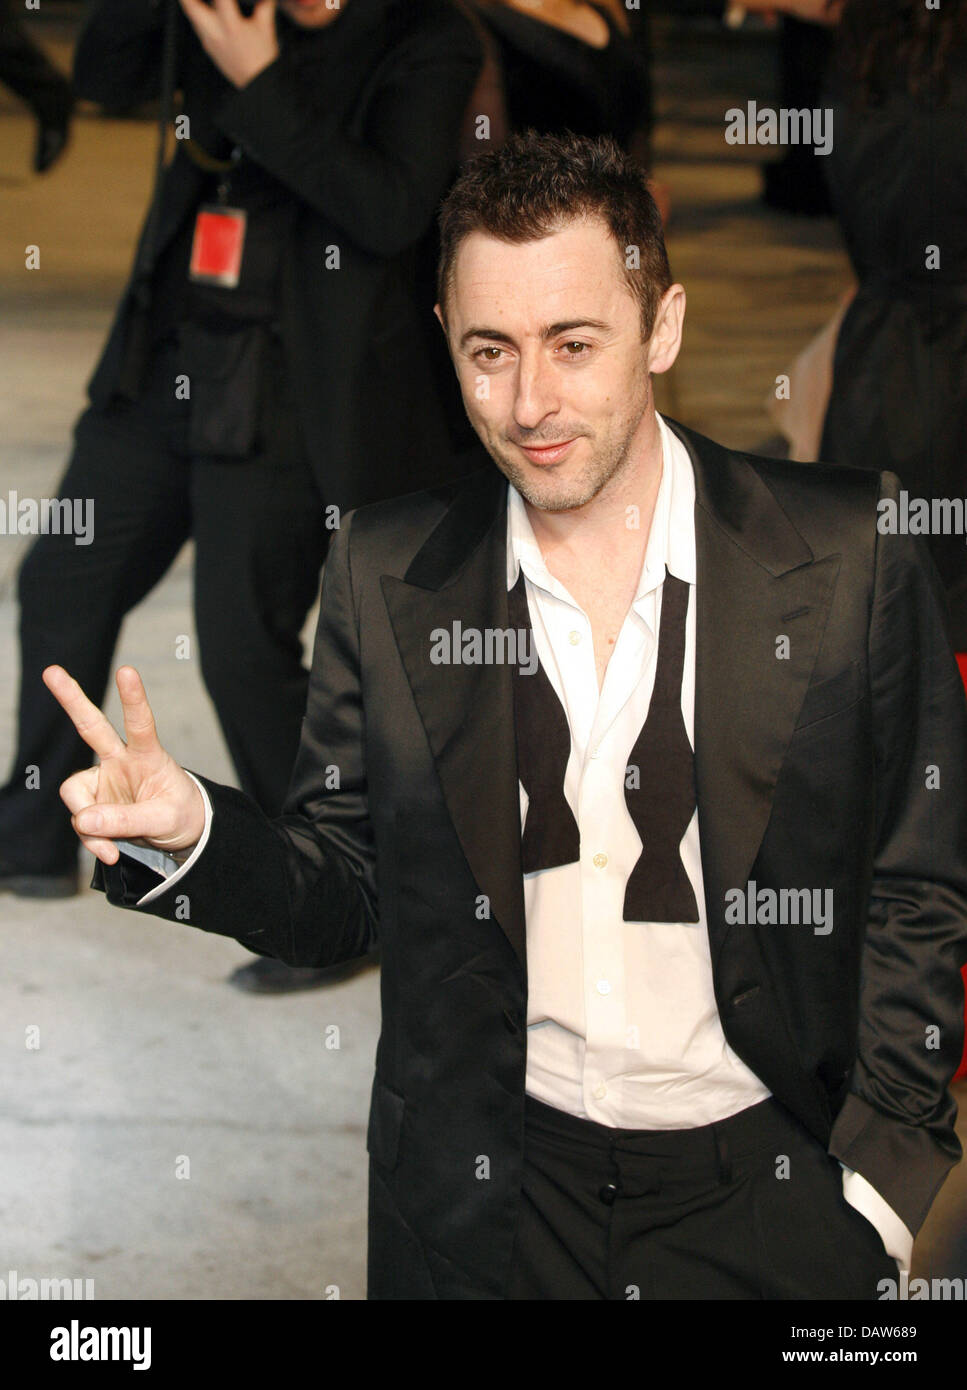 US actor Giovanni Ribisi poses for the cameras arriving at the Vanity Fair Oscar Party in Los Angeles, CA, United States, 25 February 2007. Photo: Hubert Boesl Stock Photo